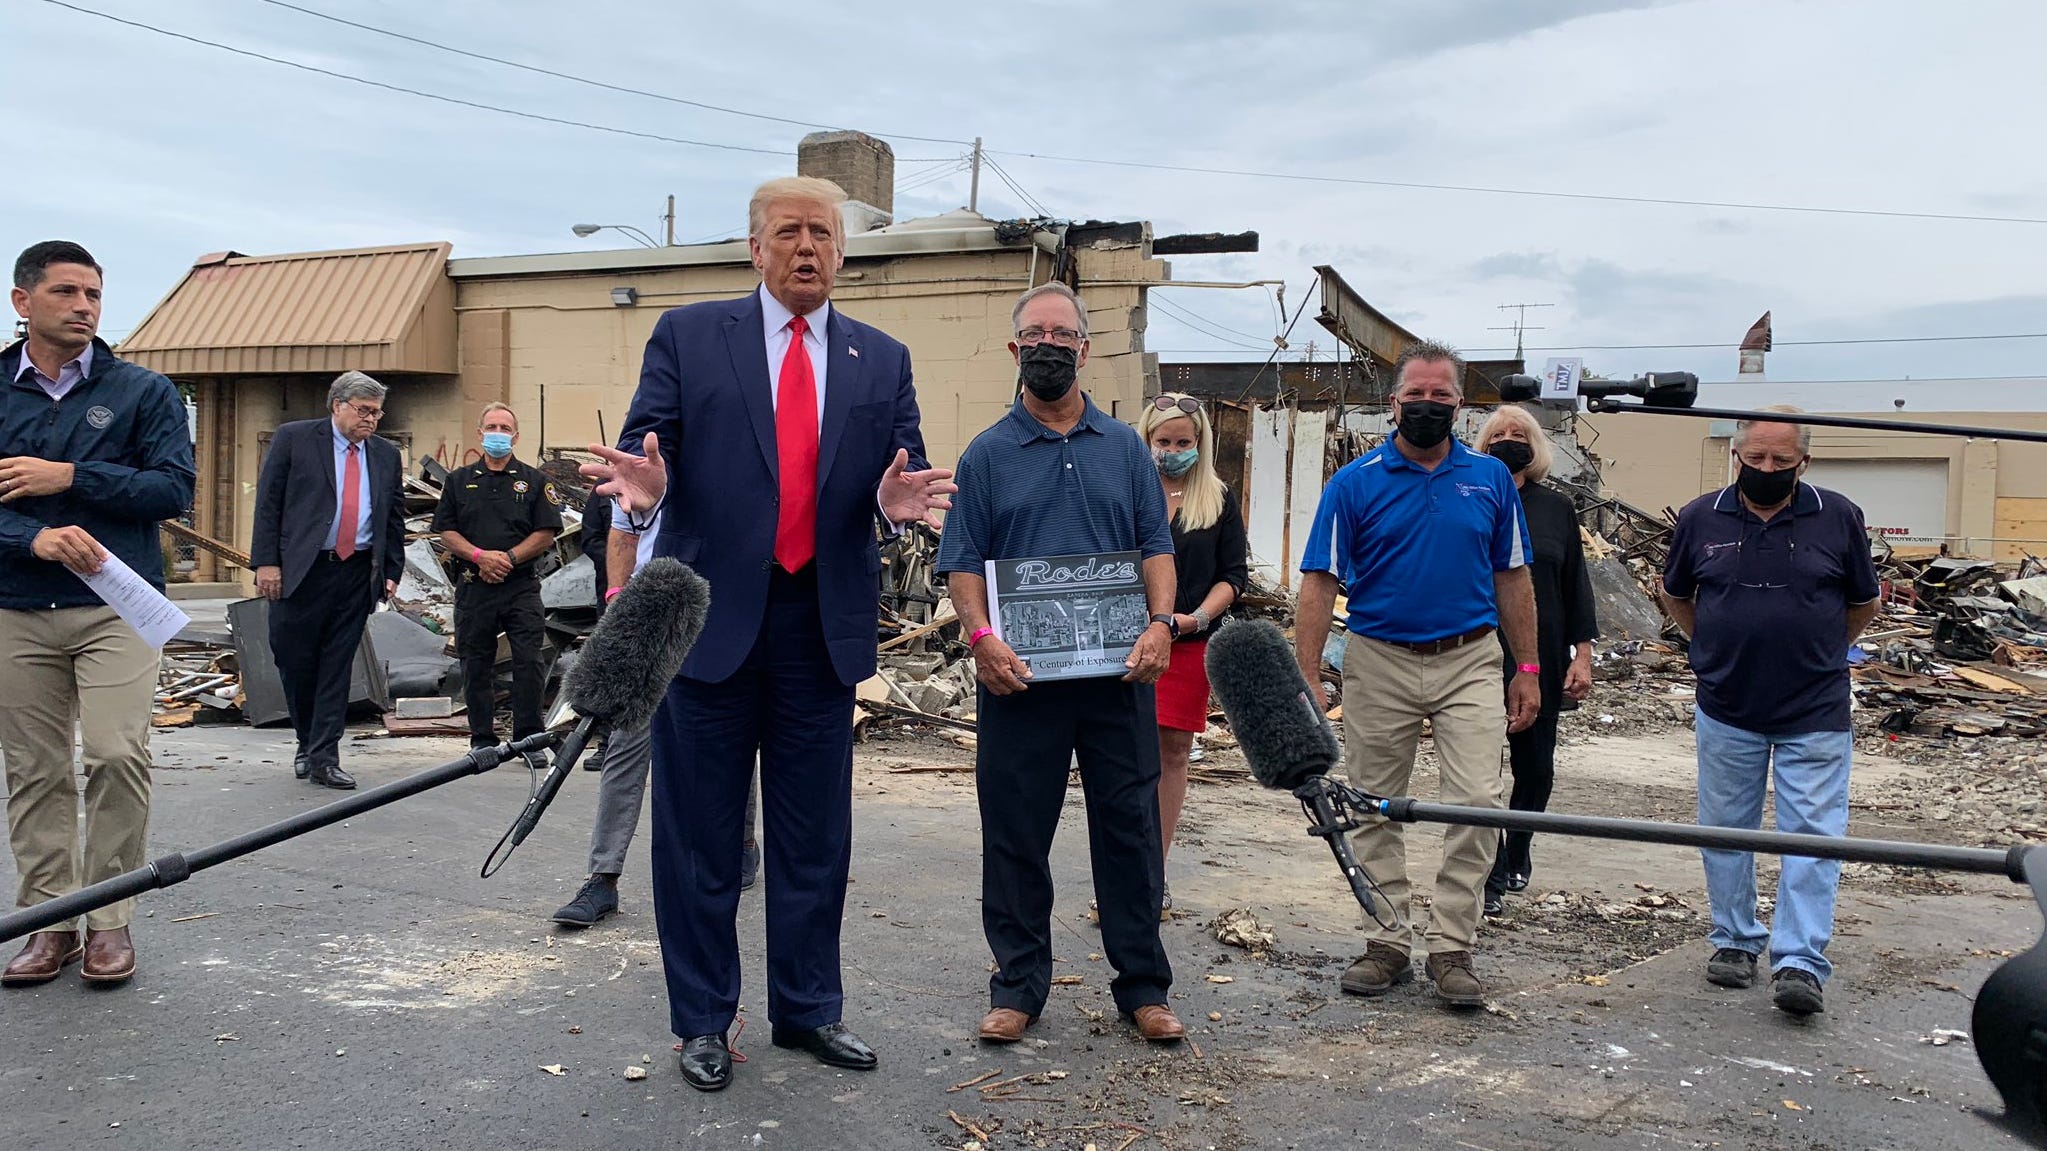 President Donald Trump meets with an owner of B&L Office Furniture in Kenosha, Wisconsin, on Sept. 1, 2020. The business was burned down last week during unrest following the police shooting of Jacob Blake.